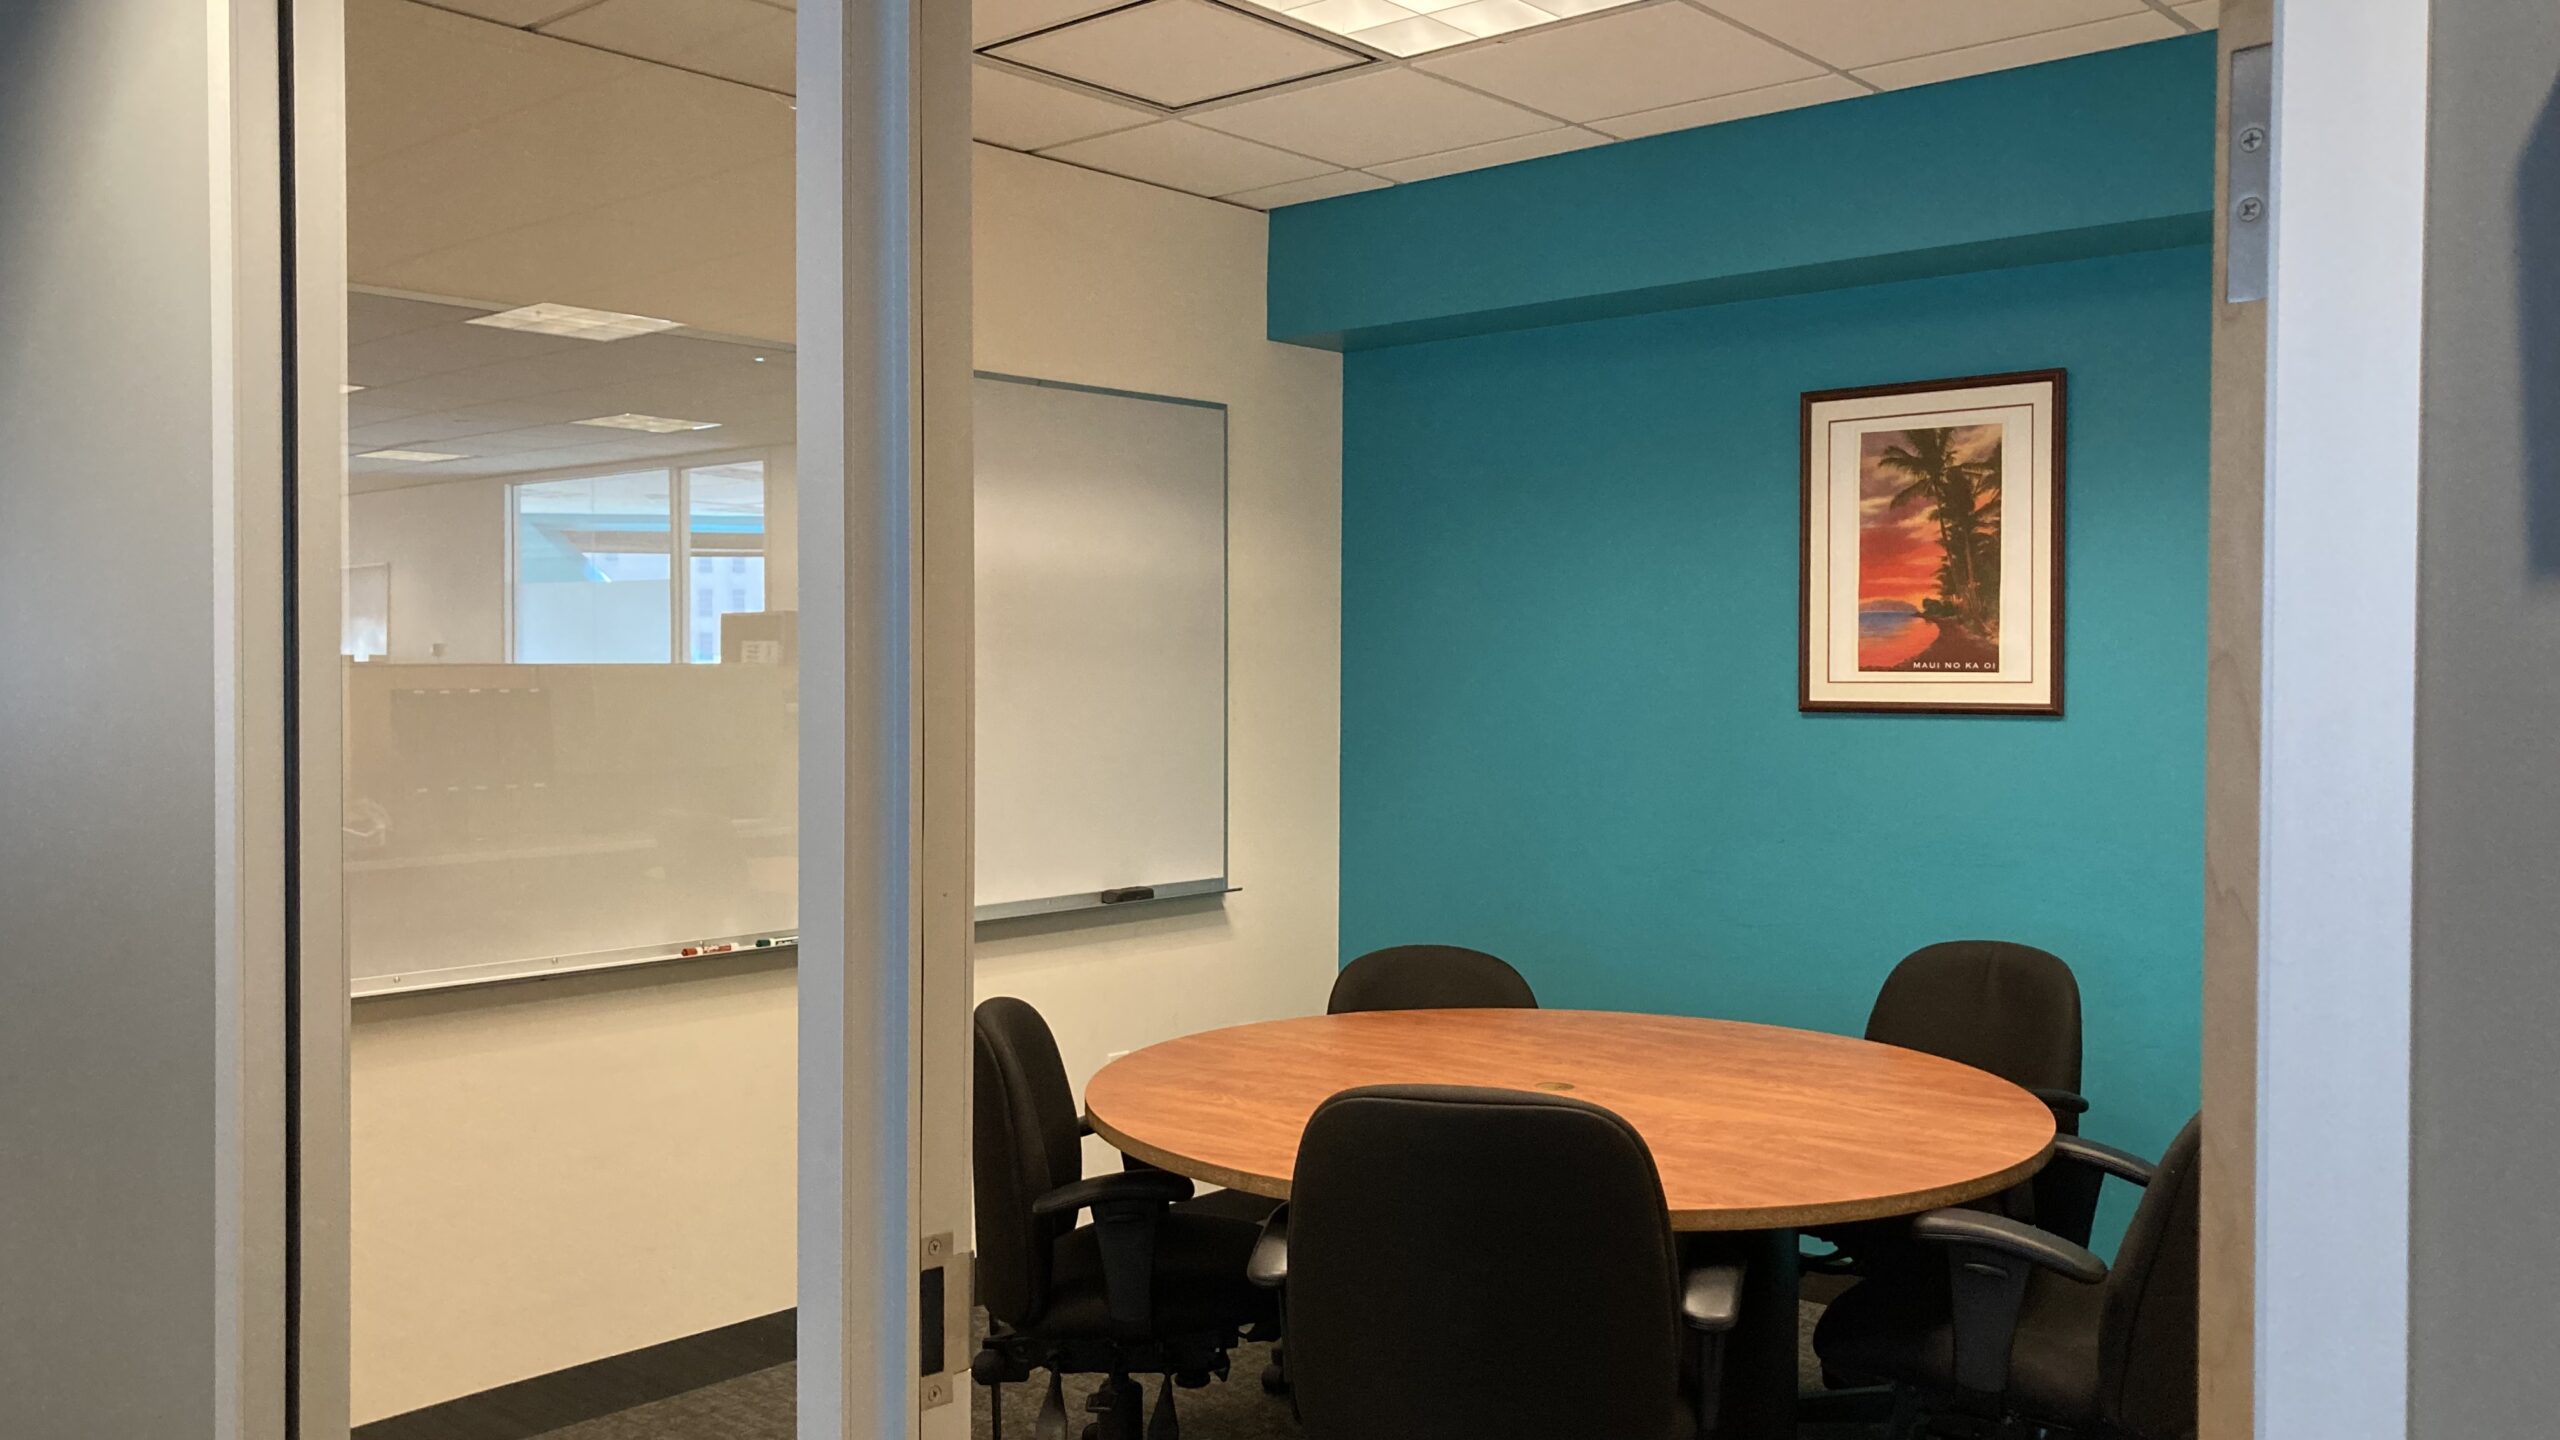 Maui private conference room for rent at SURF Incubator in downtown Seattle Washington